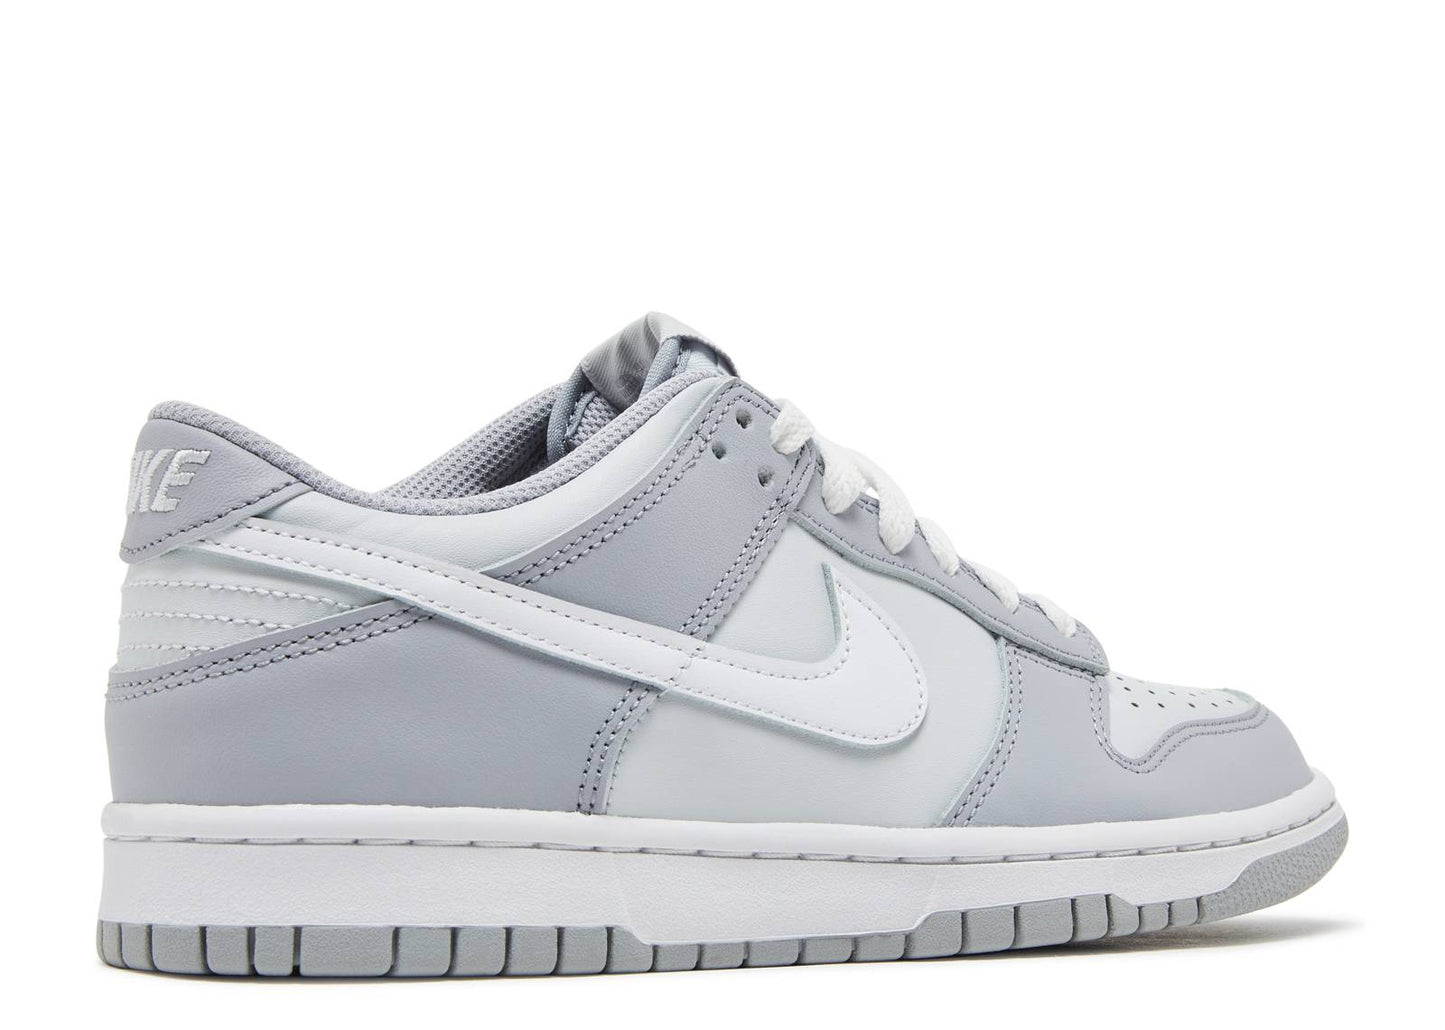 Nike Dunk Low GS "Two-Tone Grey/Pure Platinum"